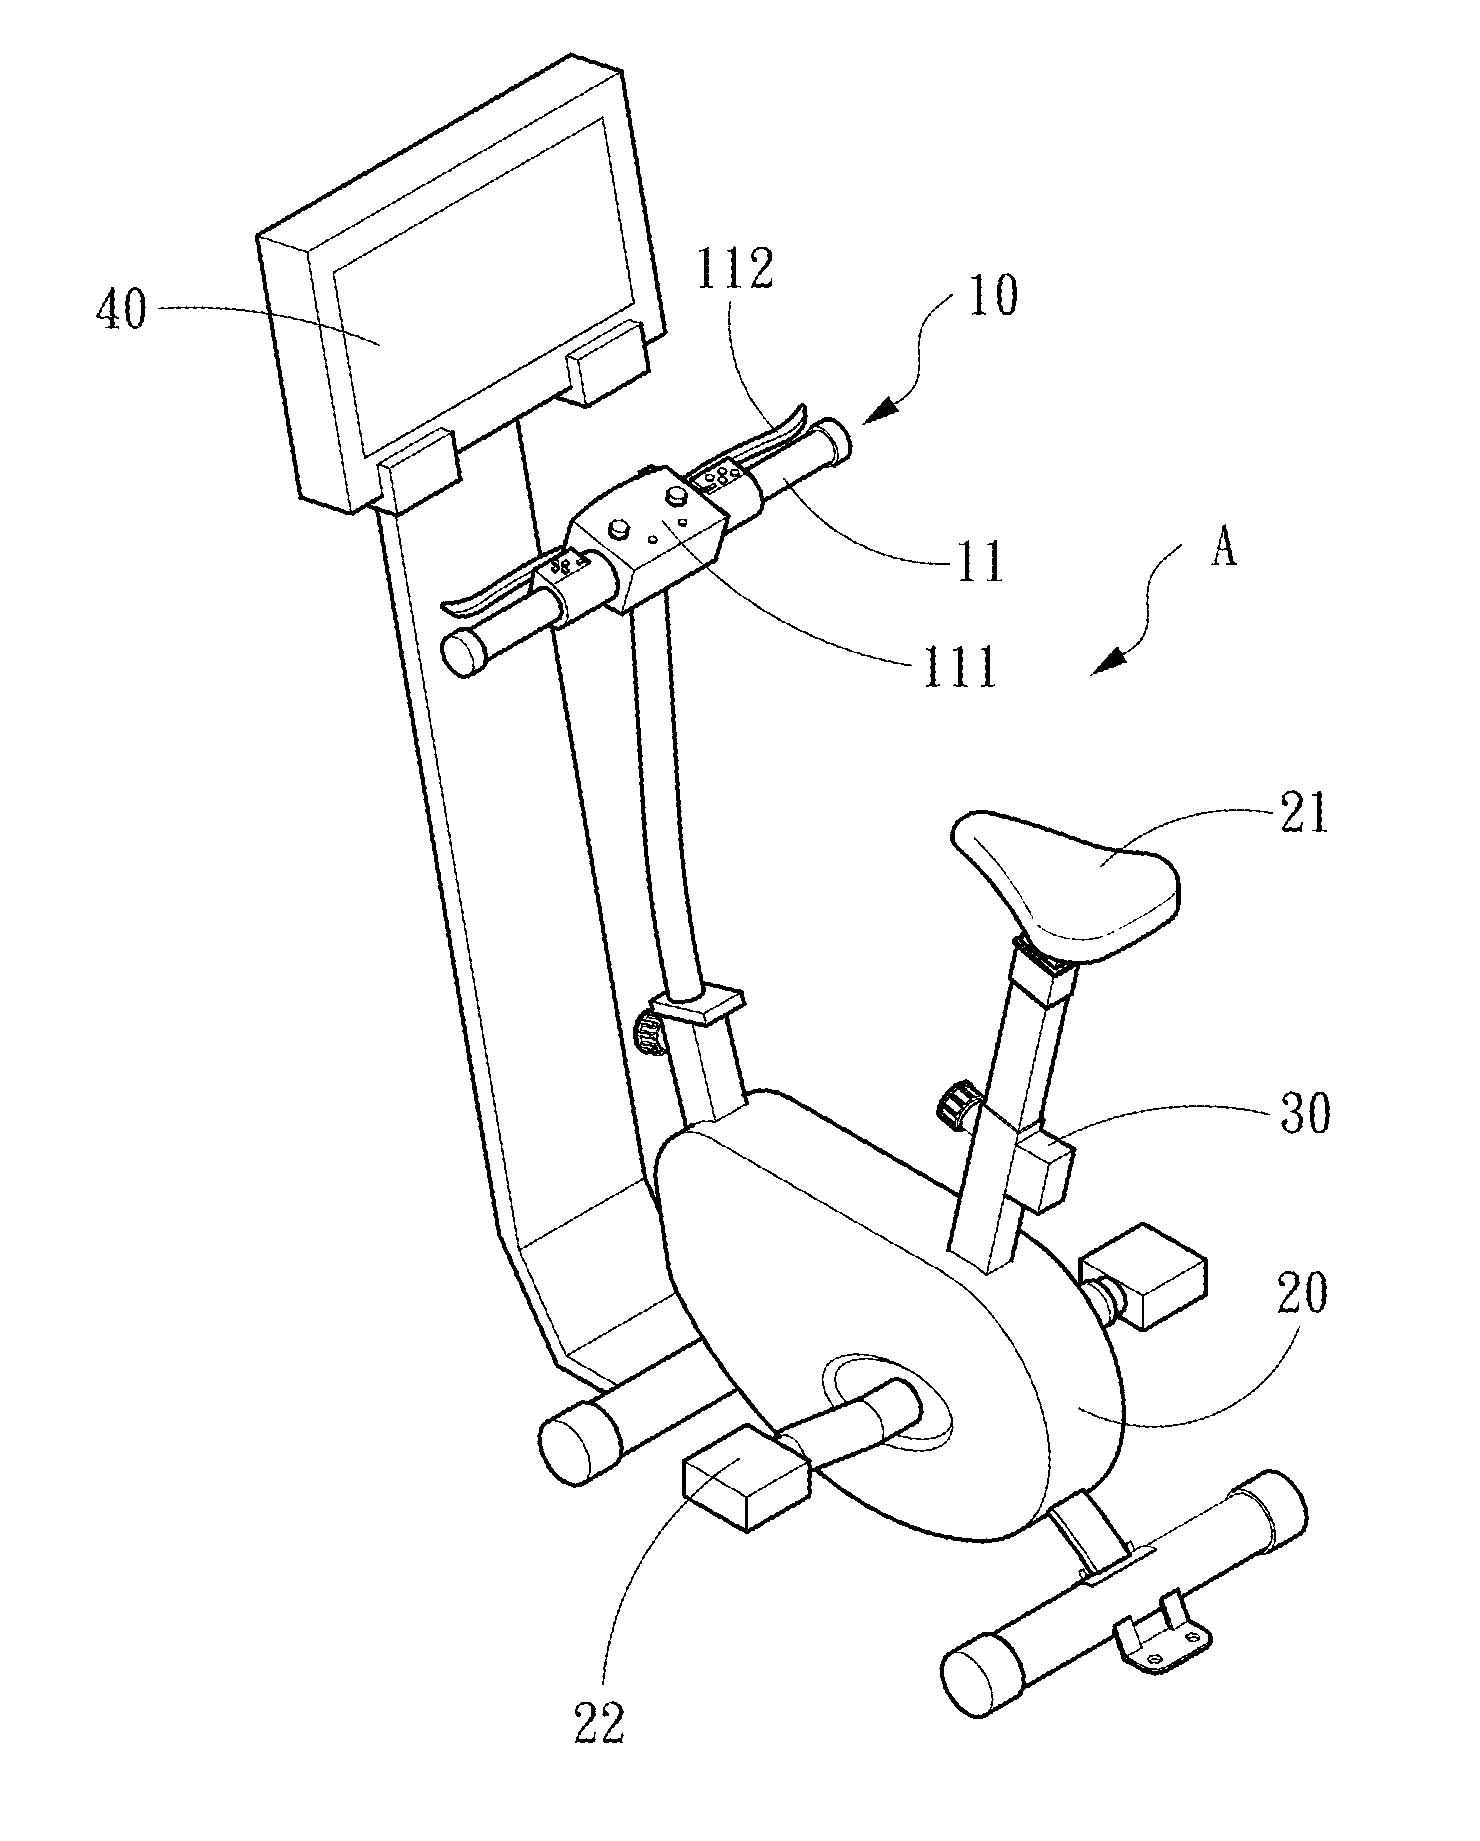 Fitness equipment combining with a cloud service system